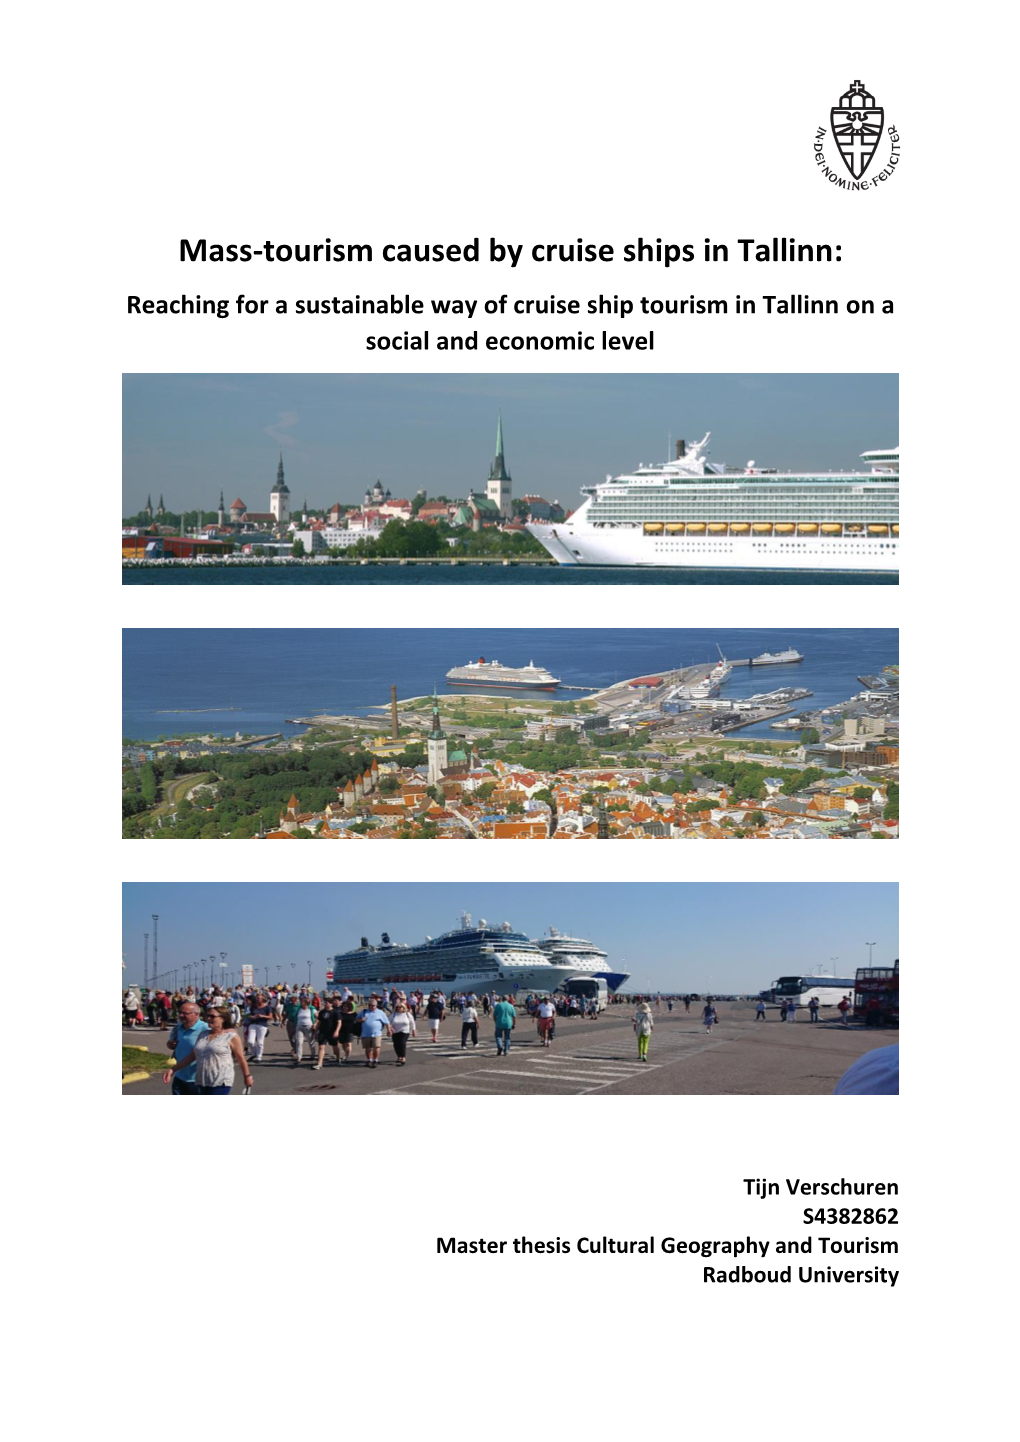 Mass-Tourism Caused by Cruise Ships in Tallinn: Reaching for a Sustainable Way of Cruise Ship Tourism in Tallinn on a Social and Economic Level